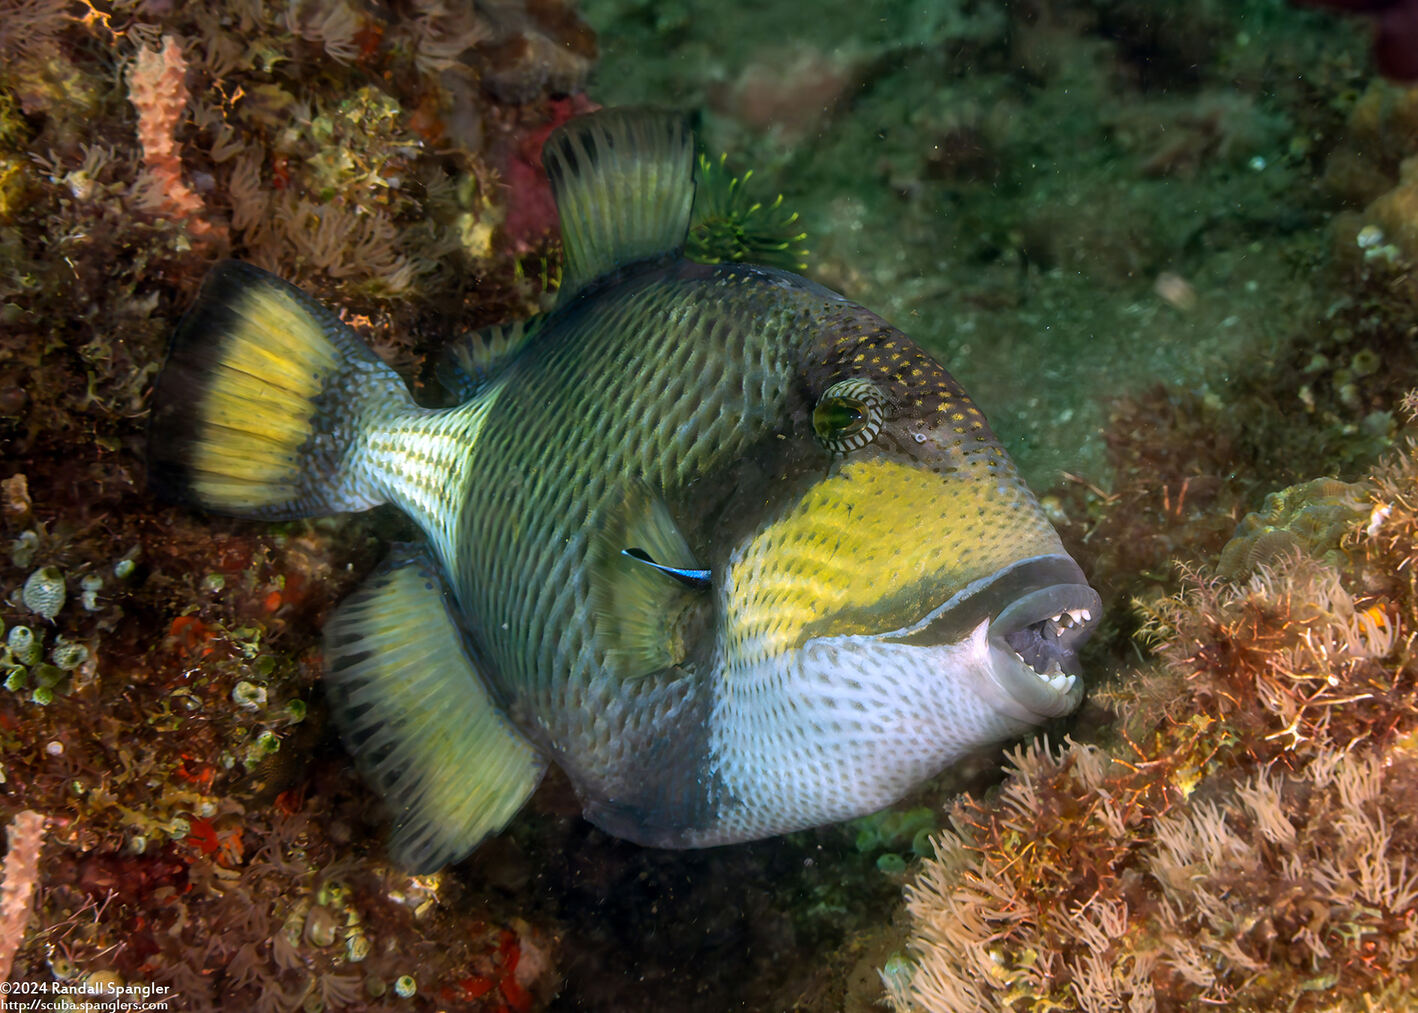 Balistoides viridescens (Titan Triggerfish); Getting cleaned; note cleaner wrasse in gill